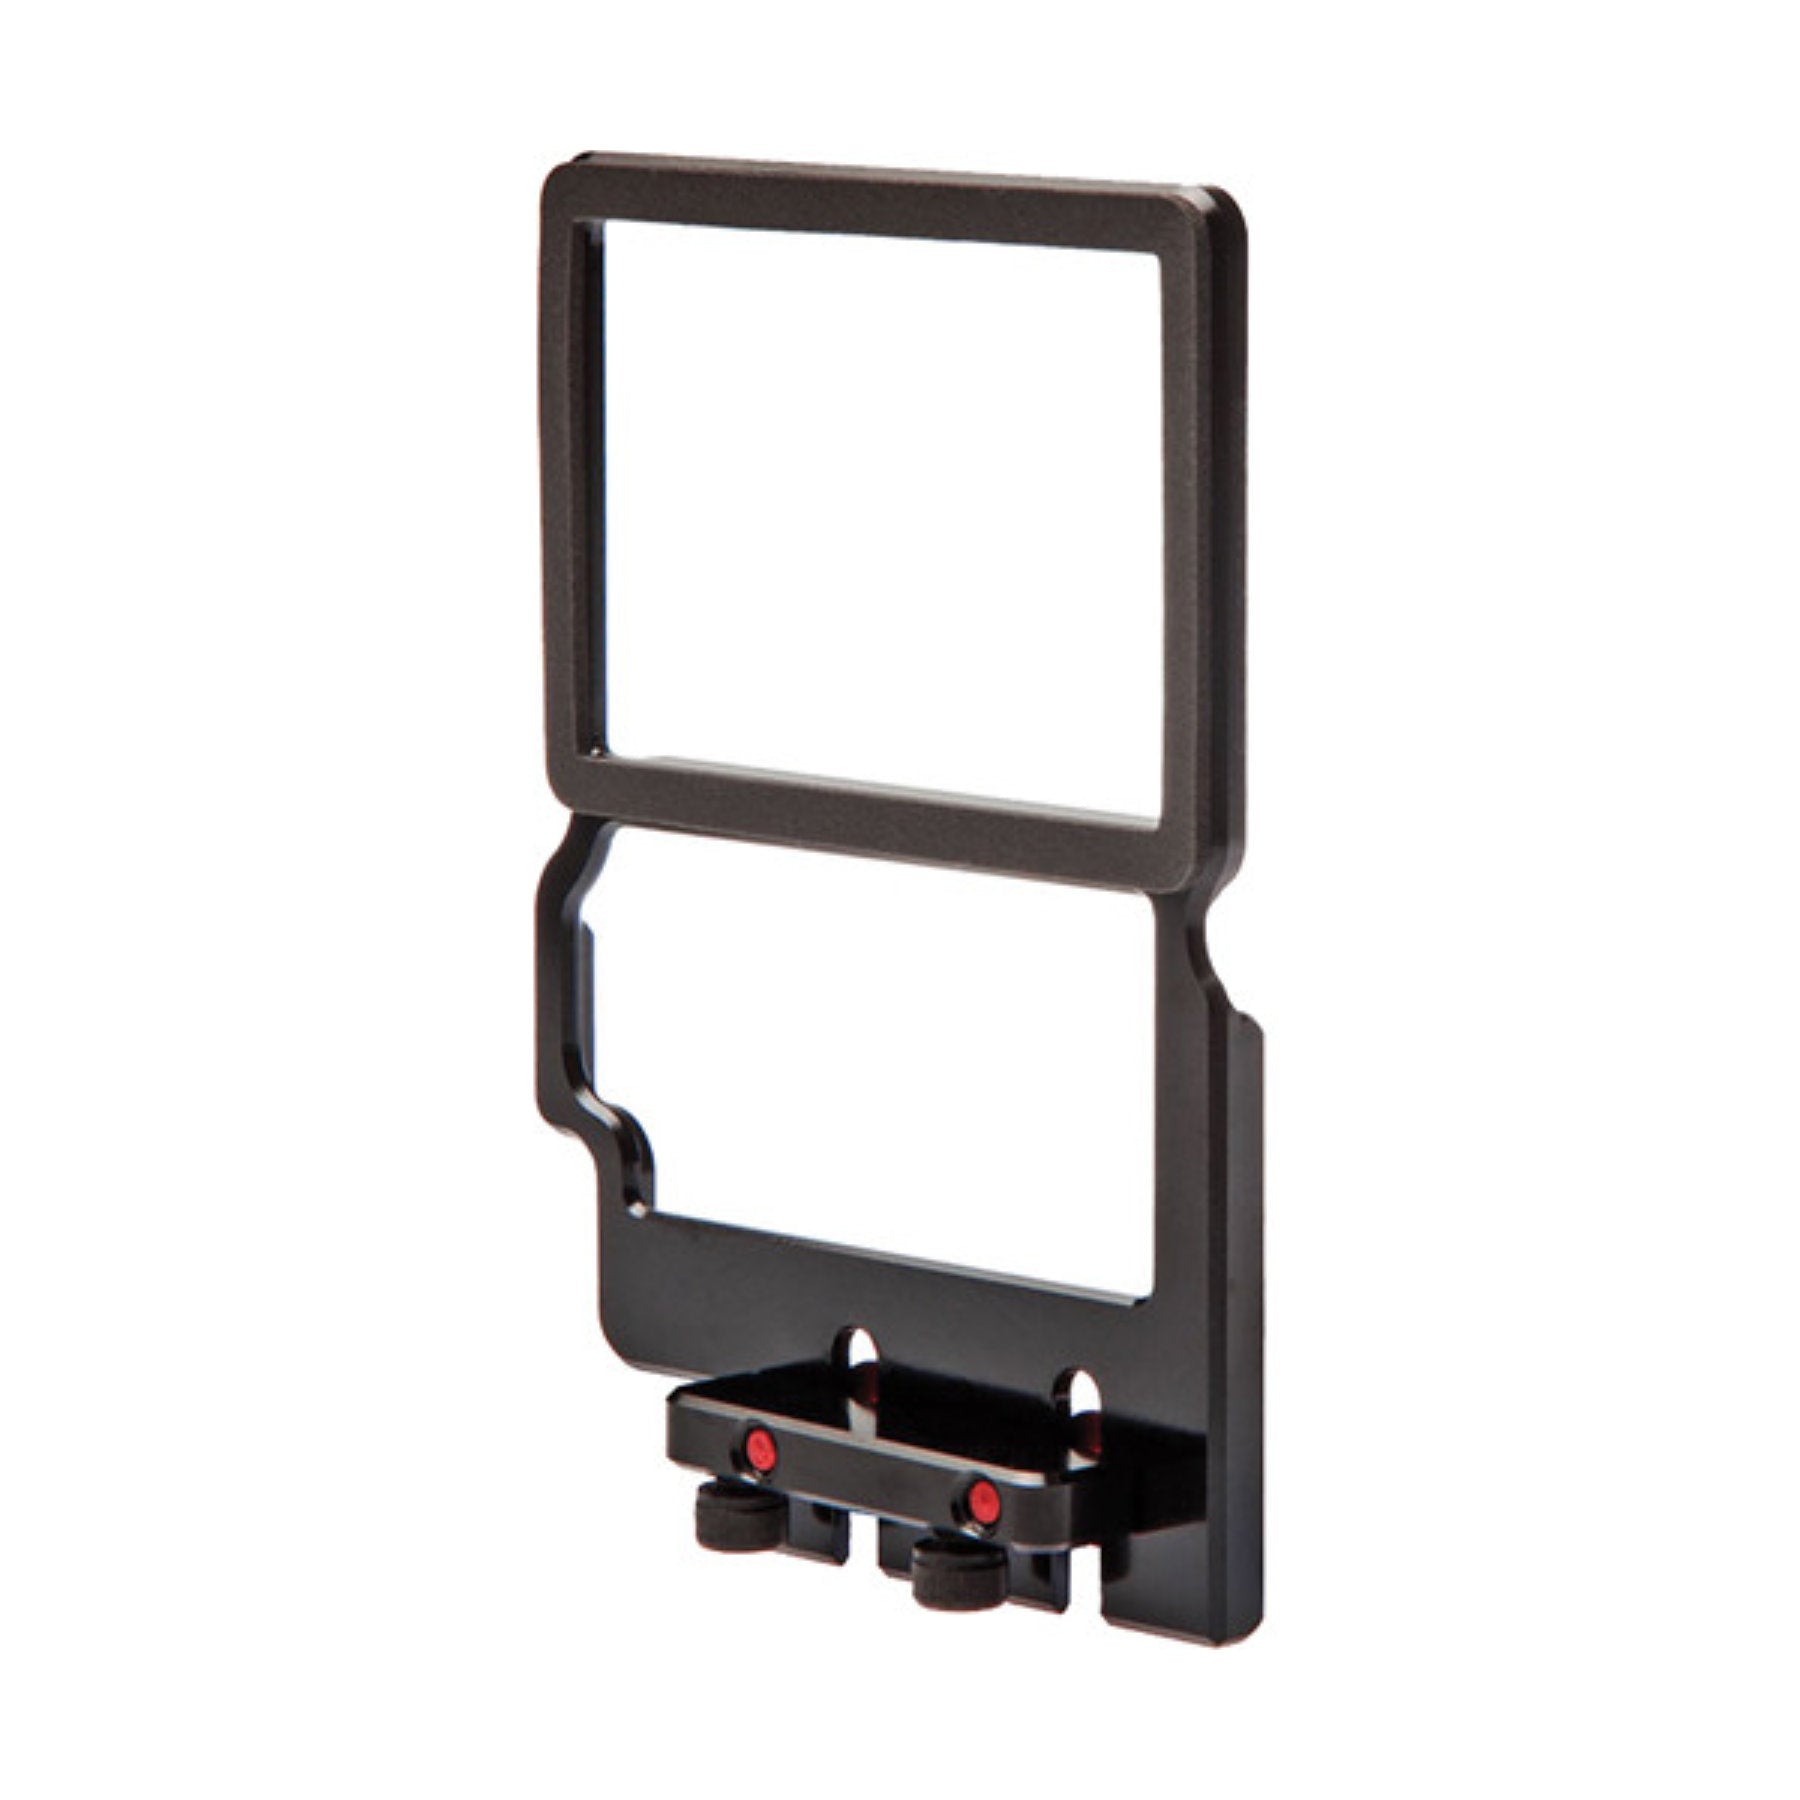 Buy Zacuto Z-Finder 3.2" Mount Frame for Tall DSLR Cameras - Ex Rental Second hand at Topic Store